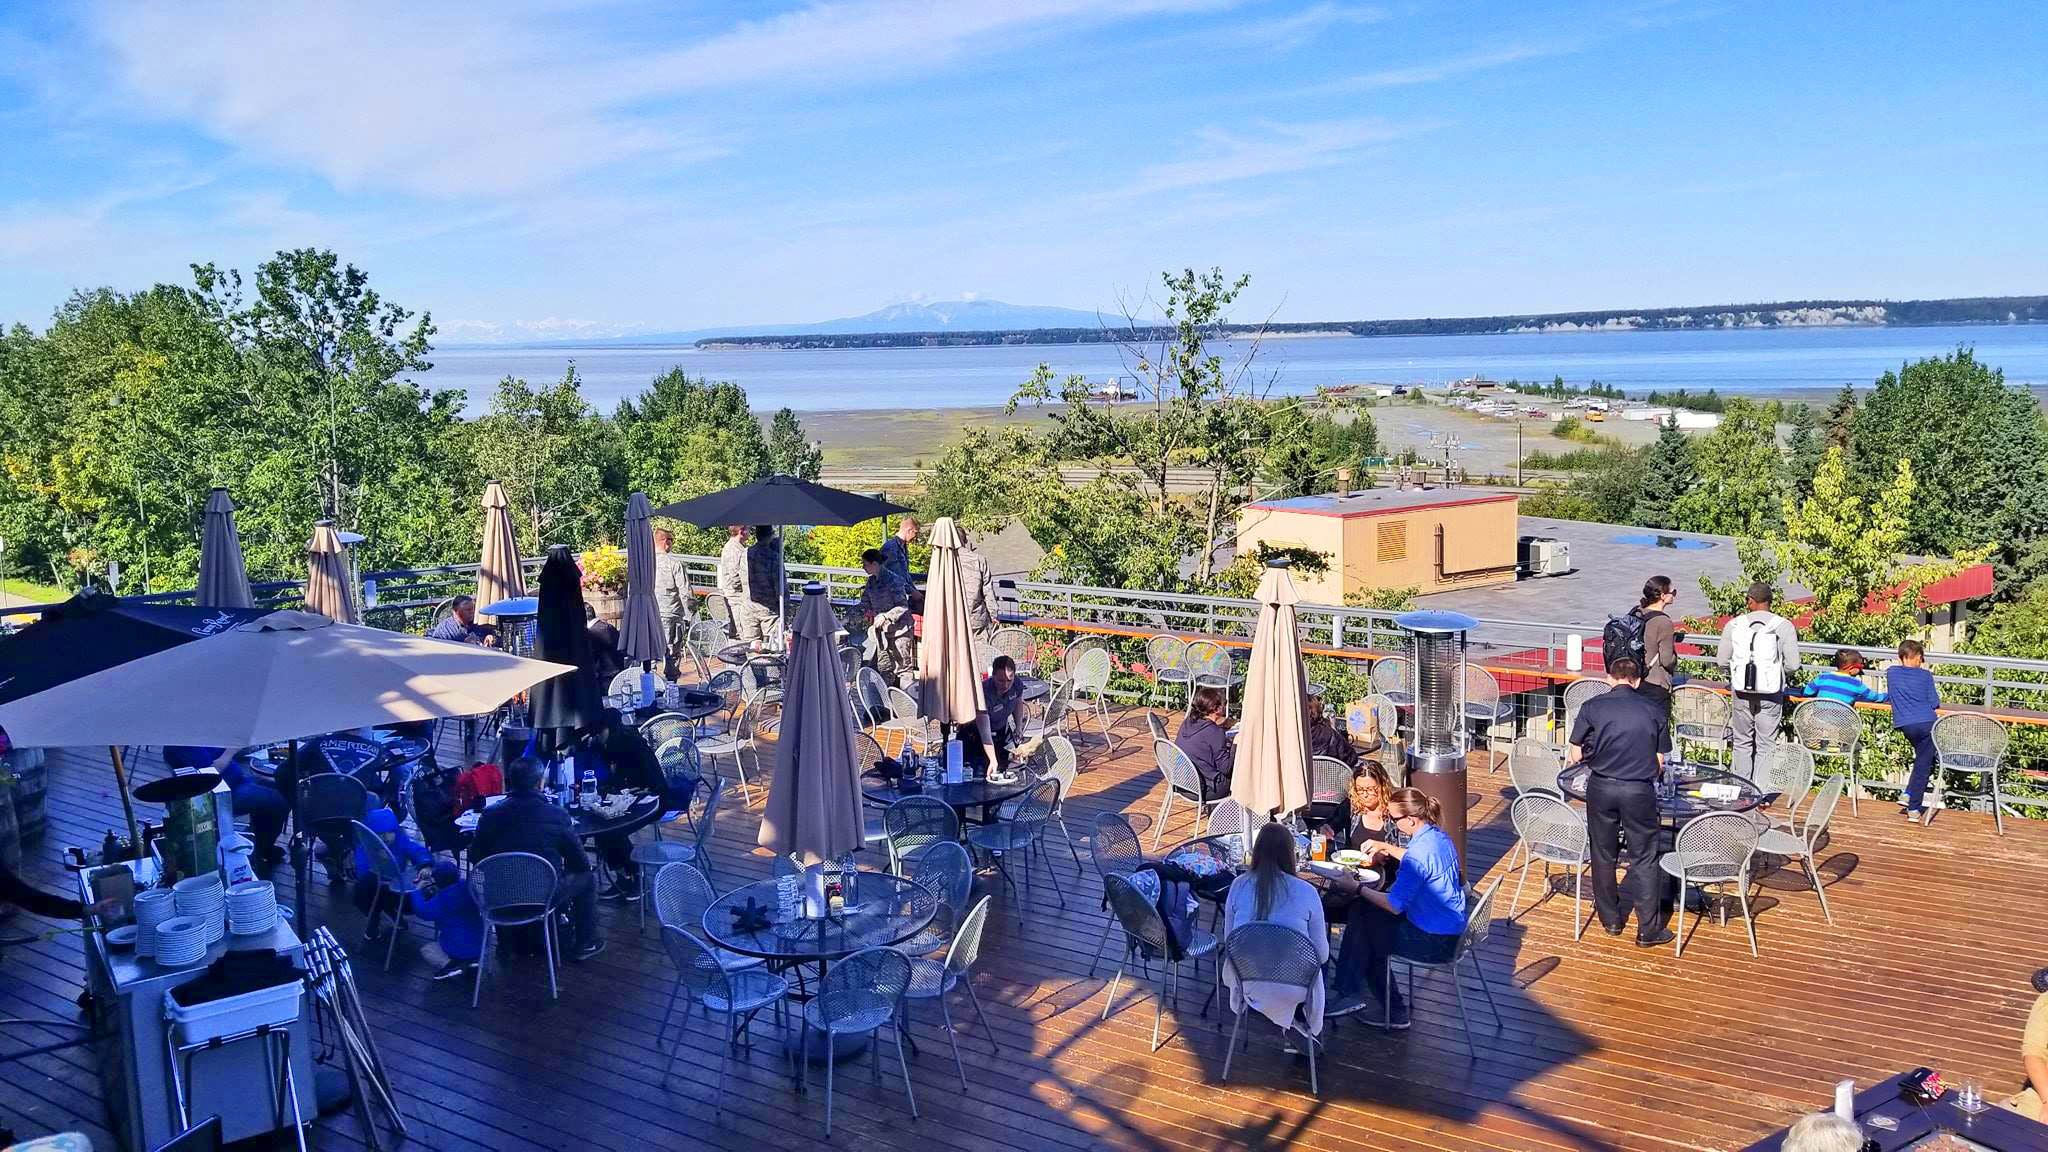 Outdoor dining area of 49th State Brewing Company - Anchorage